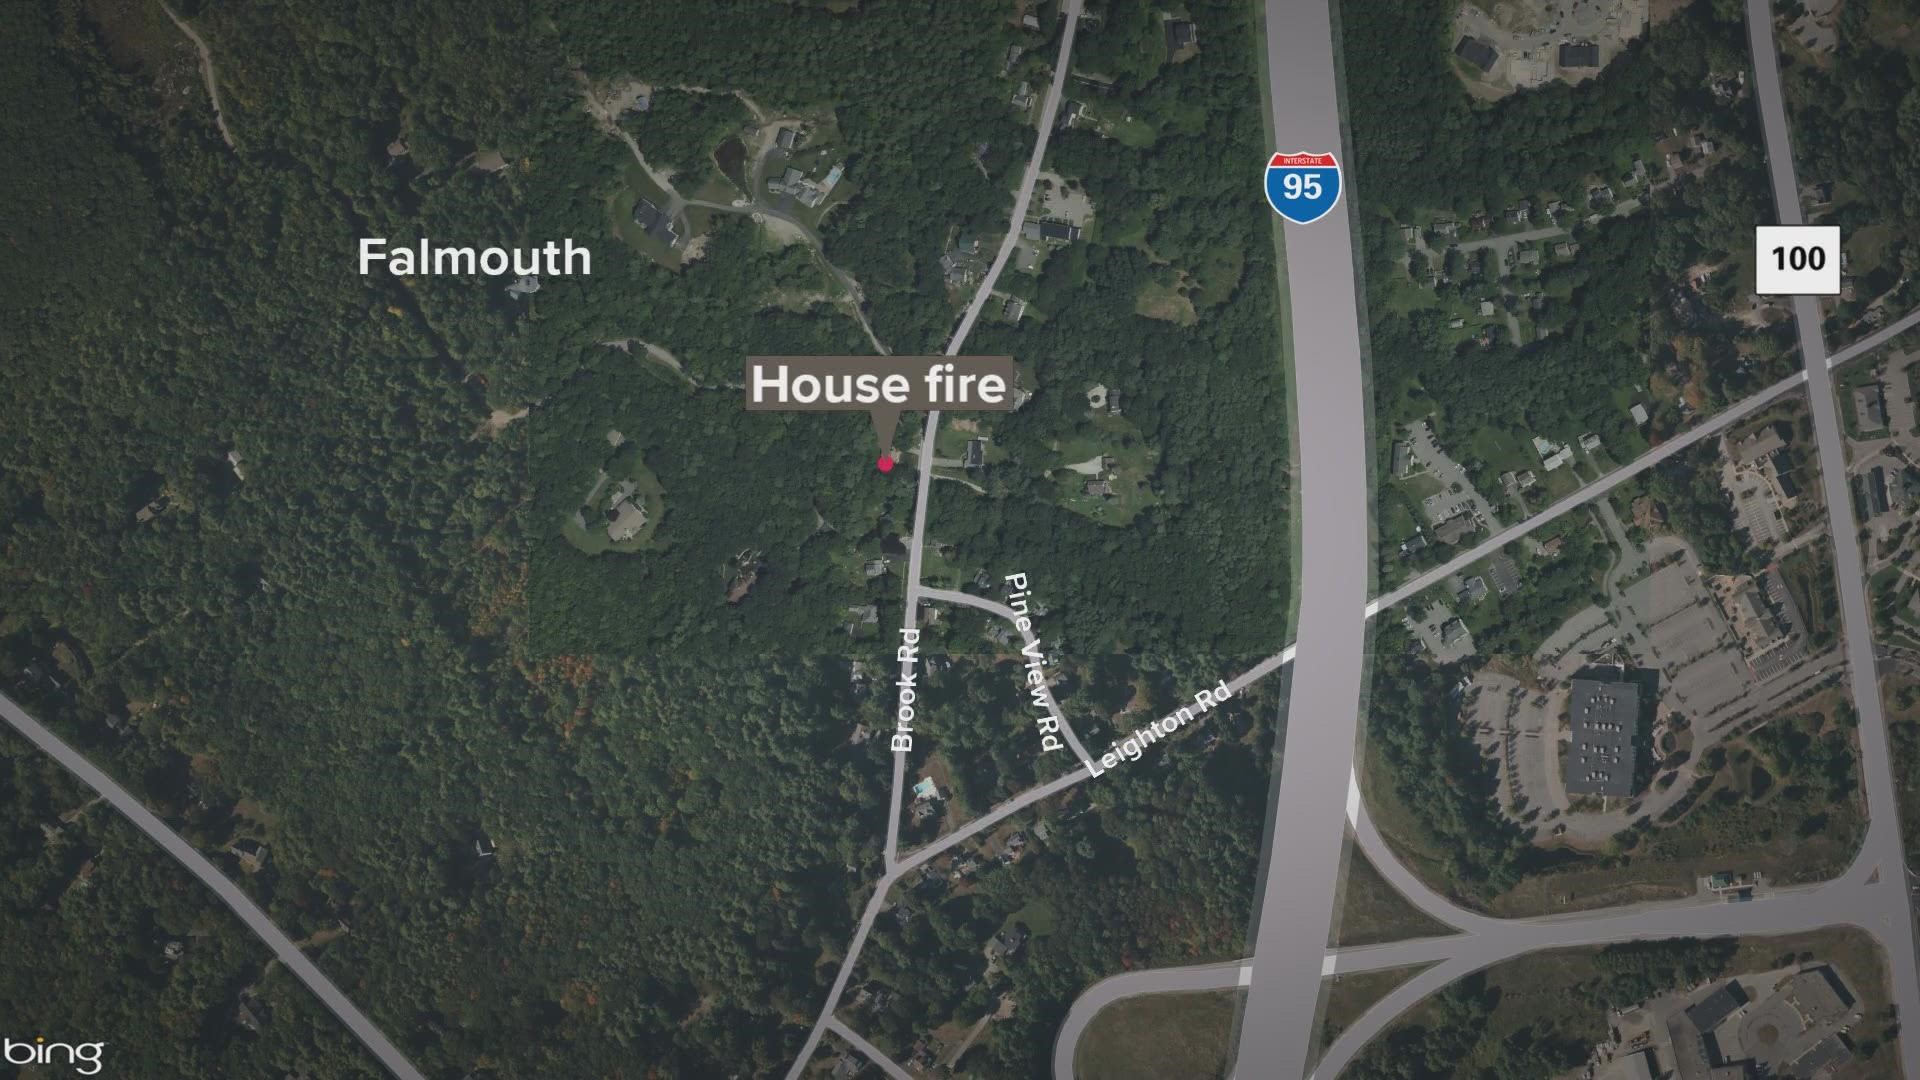 It happened at 83 Brook Road, according to a release from the Falmouth Fire Department.